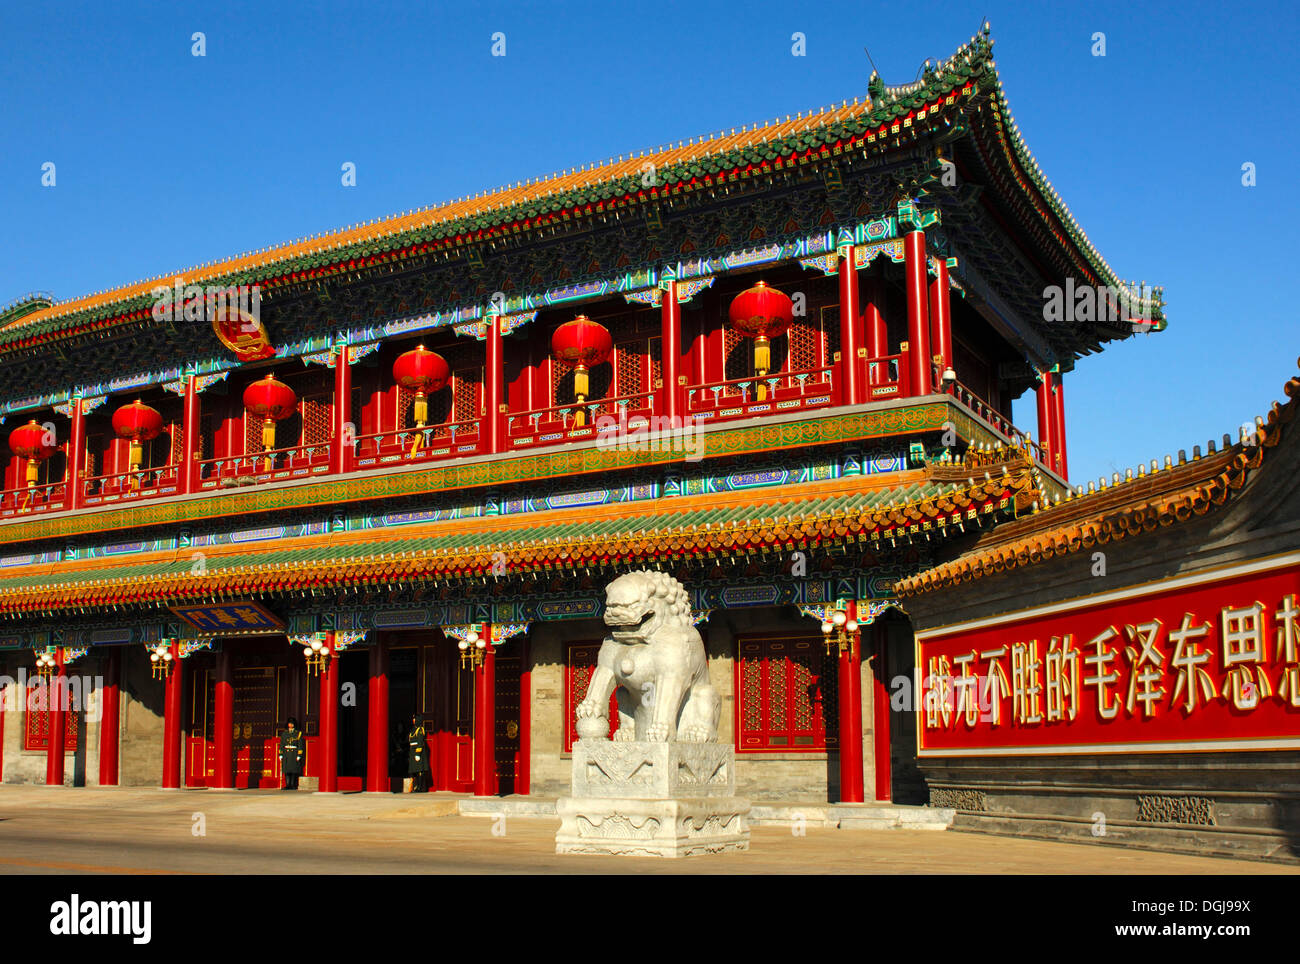 Lion figure as a guard at the Xinhuamen Gate, Gate of New China, main entrance to Zhongnanhai park and building complex, Beijing Stock Photo